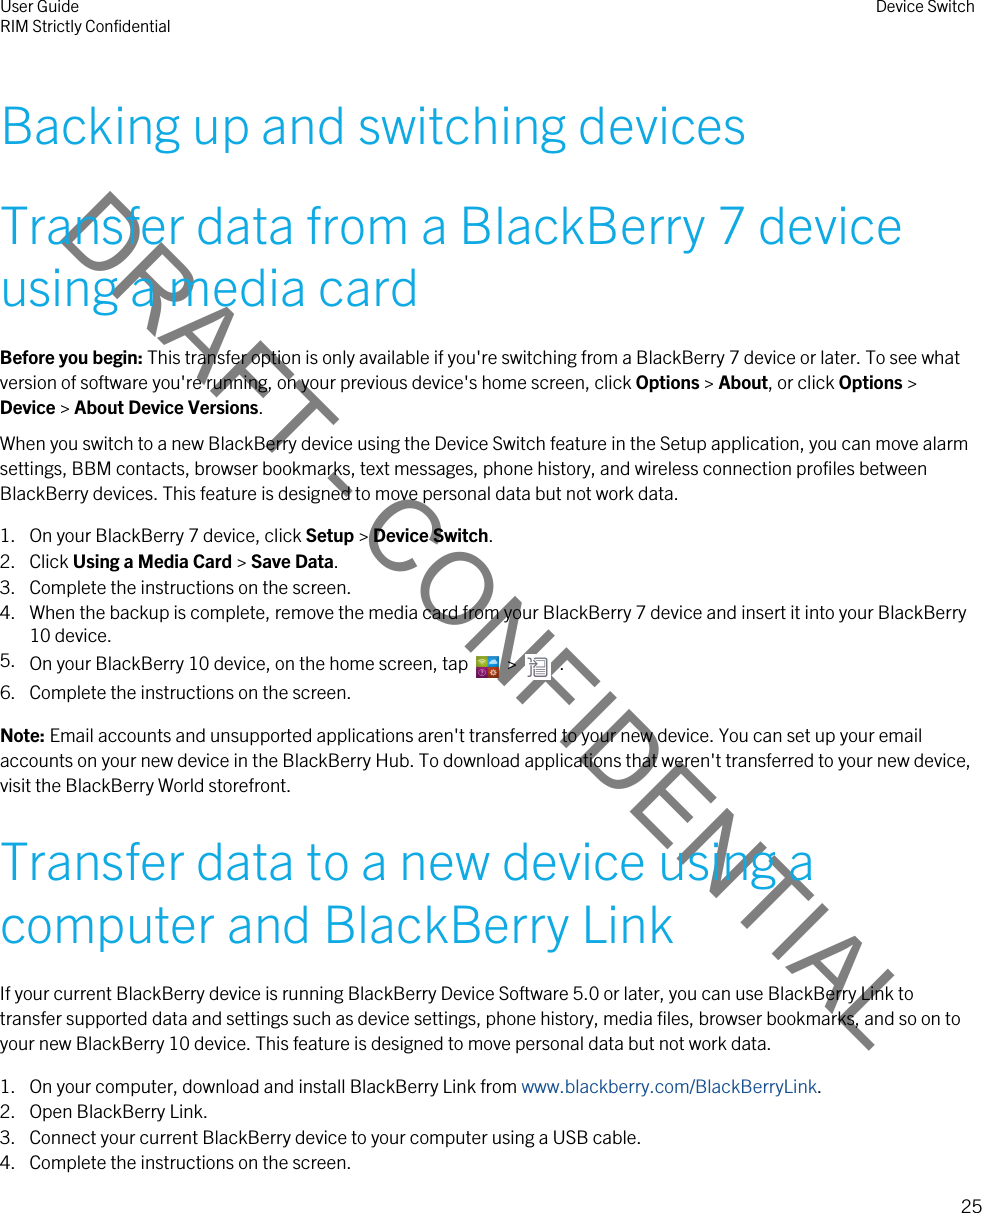 DRAFT - CONFIDENTIALBacking up and switching devicesTransfer data from a BlackBerry 7 device using a media cardBefore you begin: This transfer option is only available if you&apos;re switching from a BlackBerry 7 device or later. To see what version of software you&apos;re running, on your previous device&apos;s home screen, click Options &gt; About, or click Options &gt; Device &gt; About Device Versions.When you switch to a new BlackBerry device using the Device Switch feature in the Setup application, you can move alarm settings, BBM contacts, browser bookmarks, text messages, phone history, and wireless connection profiles between BlackBerry devices. This feature is designed to move personal data but not work data.1. On your BlackBerry 7 device, click Setup &gt; Device Switch.2. Click Using a Media Card &gt; Save Data.3. Complete the instructions on the screen.4. When the backup is complete, remove the media card from your BlackBerry 7 device and insert it into your BlackBerry 10 device.5. On your BlackBerry 10 device, on the home screen, tap    &gt;    .6. Complete the instructions on the screen.Note: Email accounts and unsupported applications aren&apos;t transferred to your new device. You can set up your email accounts on your new device in the BlackBerry Hub. To download applications that weren&apos;t transferred to your new device, visit the BlackBerry World storefront.Transfer data to a new device using a computer and BlackBerry LinkIf your current BlackBerry device is running BlackBerry Device Software 5.0 or later, you can use BlackBerry Link to transfer supported data and settings such as device settings, phone history, media files, browser bookmarks, and so on to your new BlackBerry 10 device. This feature is designed to move personal data but not work data.1. On your computer, download and install BlackBerry Link from www.blackberry.com/BlackBerryLink.2. Open BlackBerry Link.3. Connect your current BlackBerry device to your computer using a USB cable.4. Complete the instructions on the screen.User GuideRIM Strictly Confidential Device Switch25 